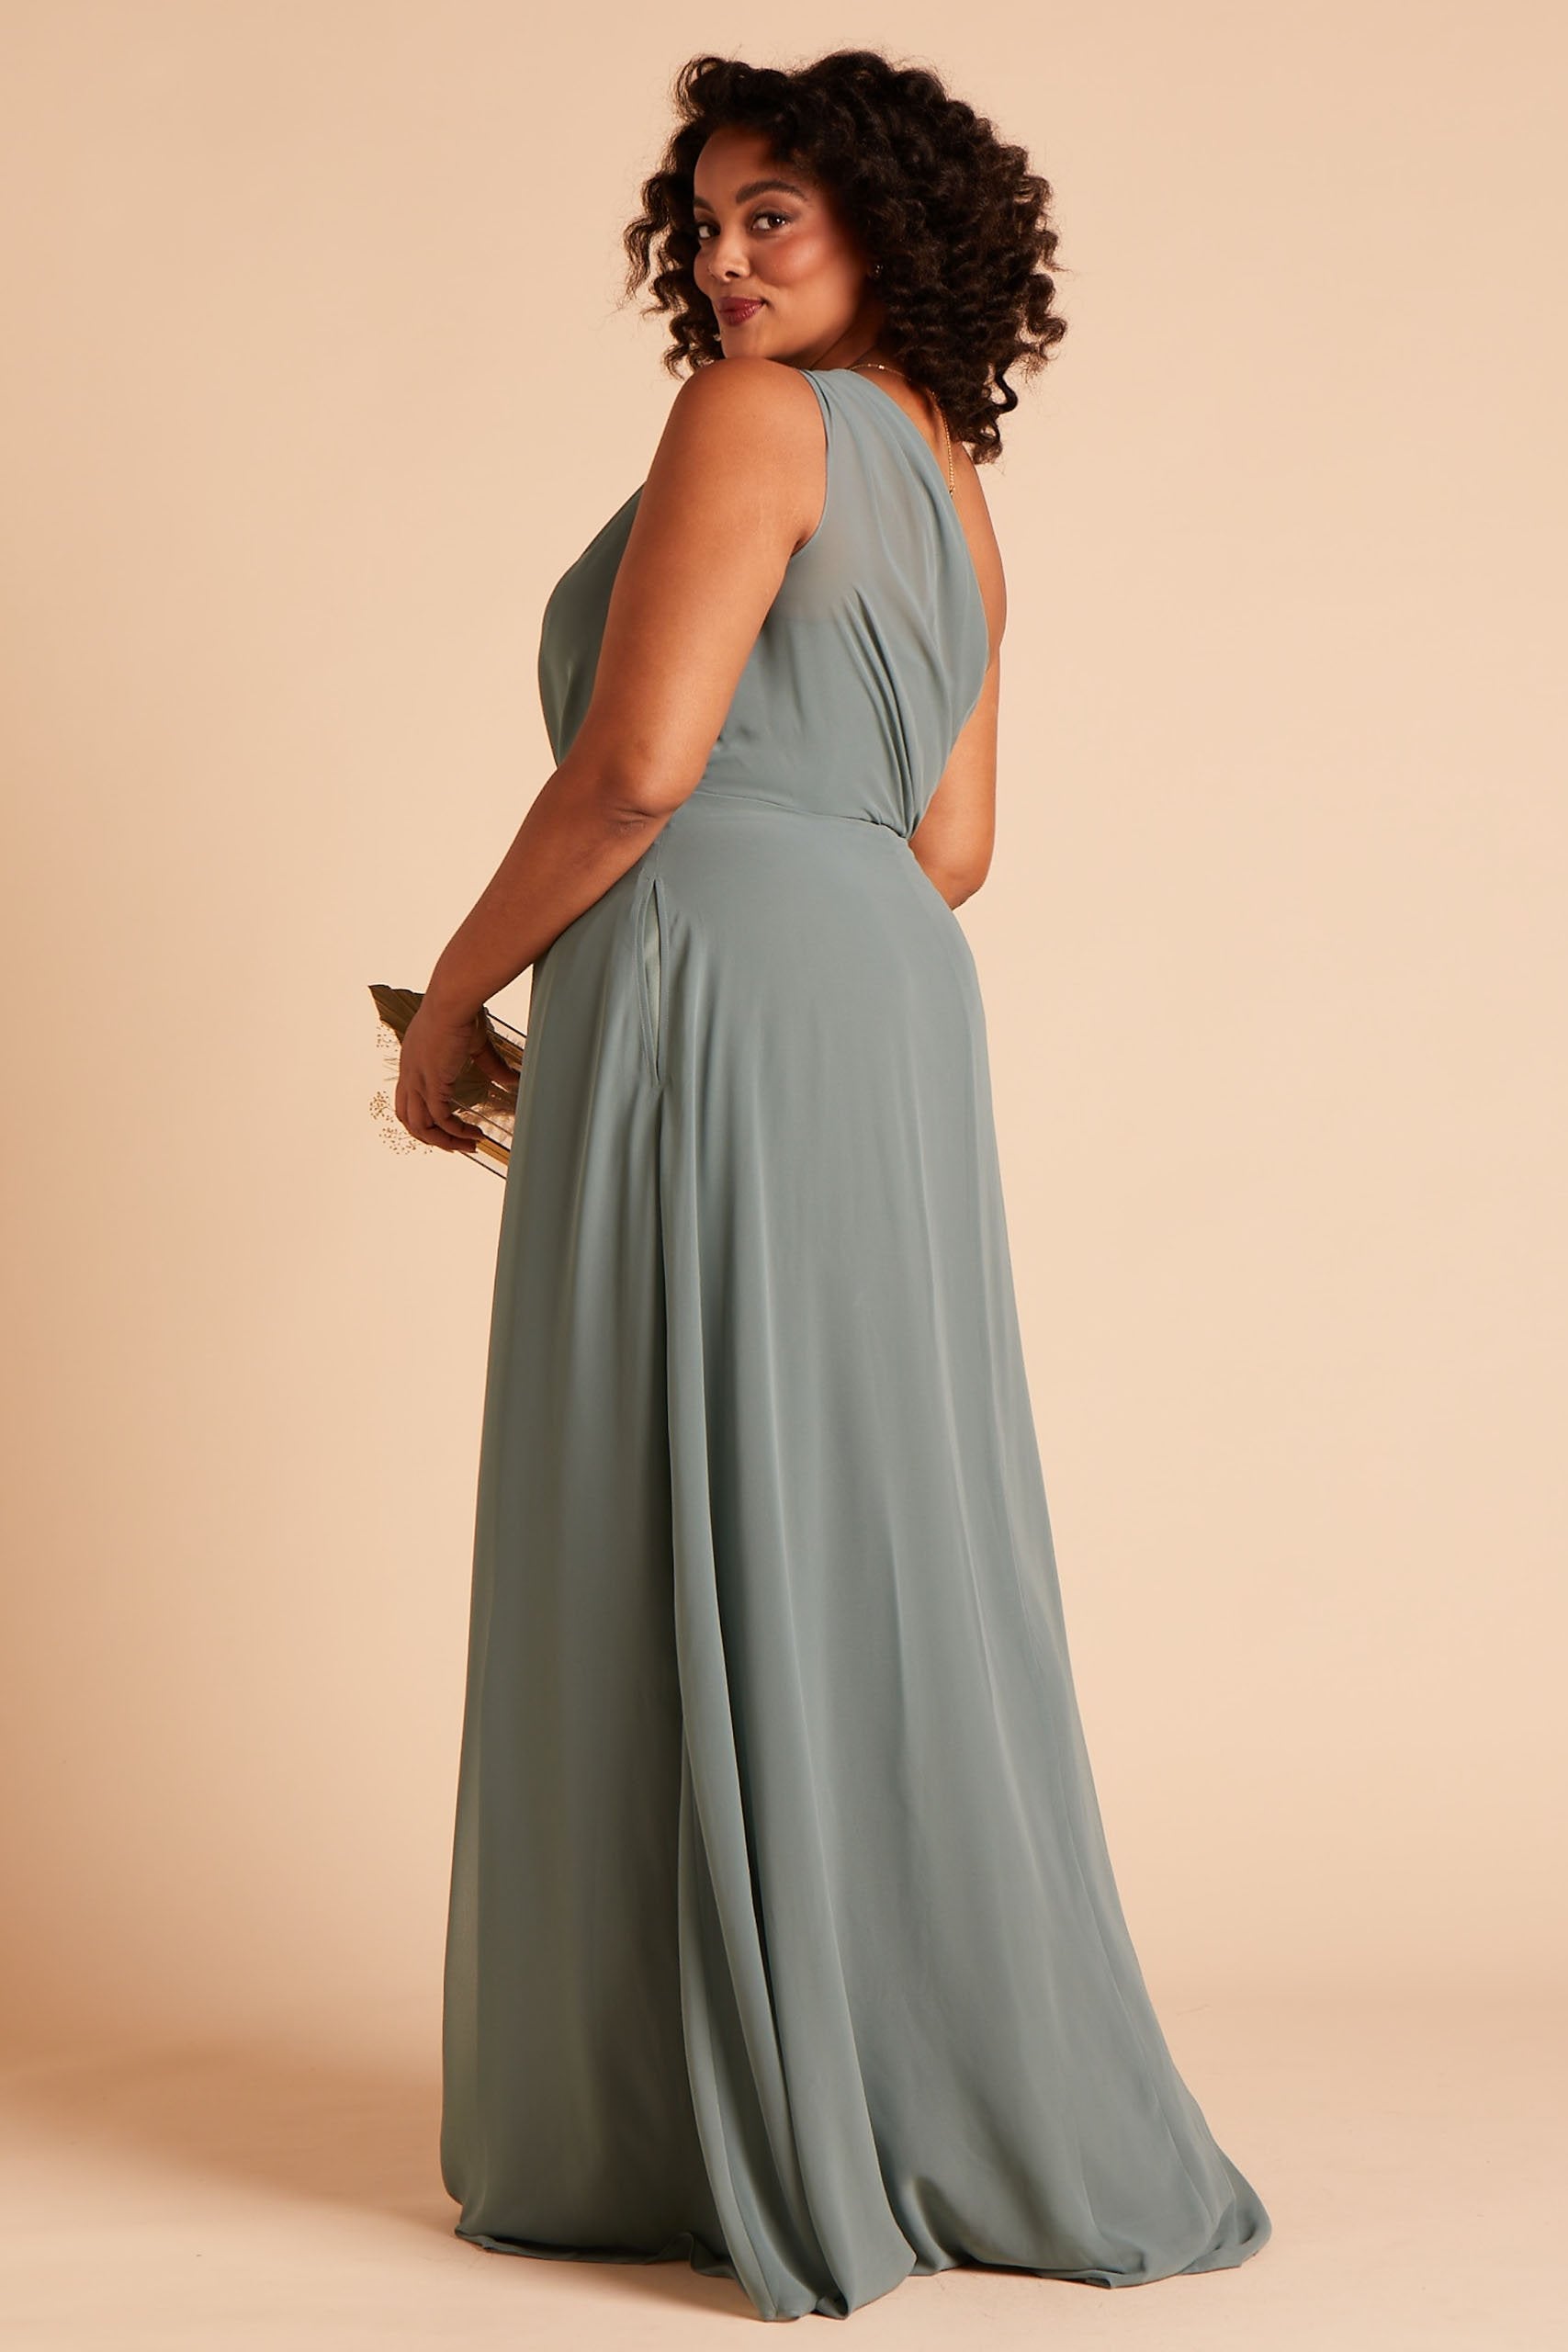 Back and side view of the floor-length Kira Dress Curve in sea glass chiffon shows a full-figured model with medium skin wearing a sheer, softly pleating chiffon gathered at the bodice shoulder and draping across the back to the side seam with an inset pocket.